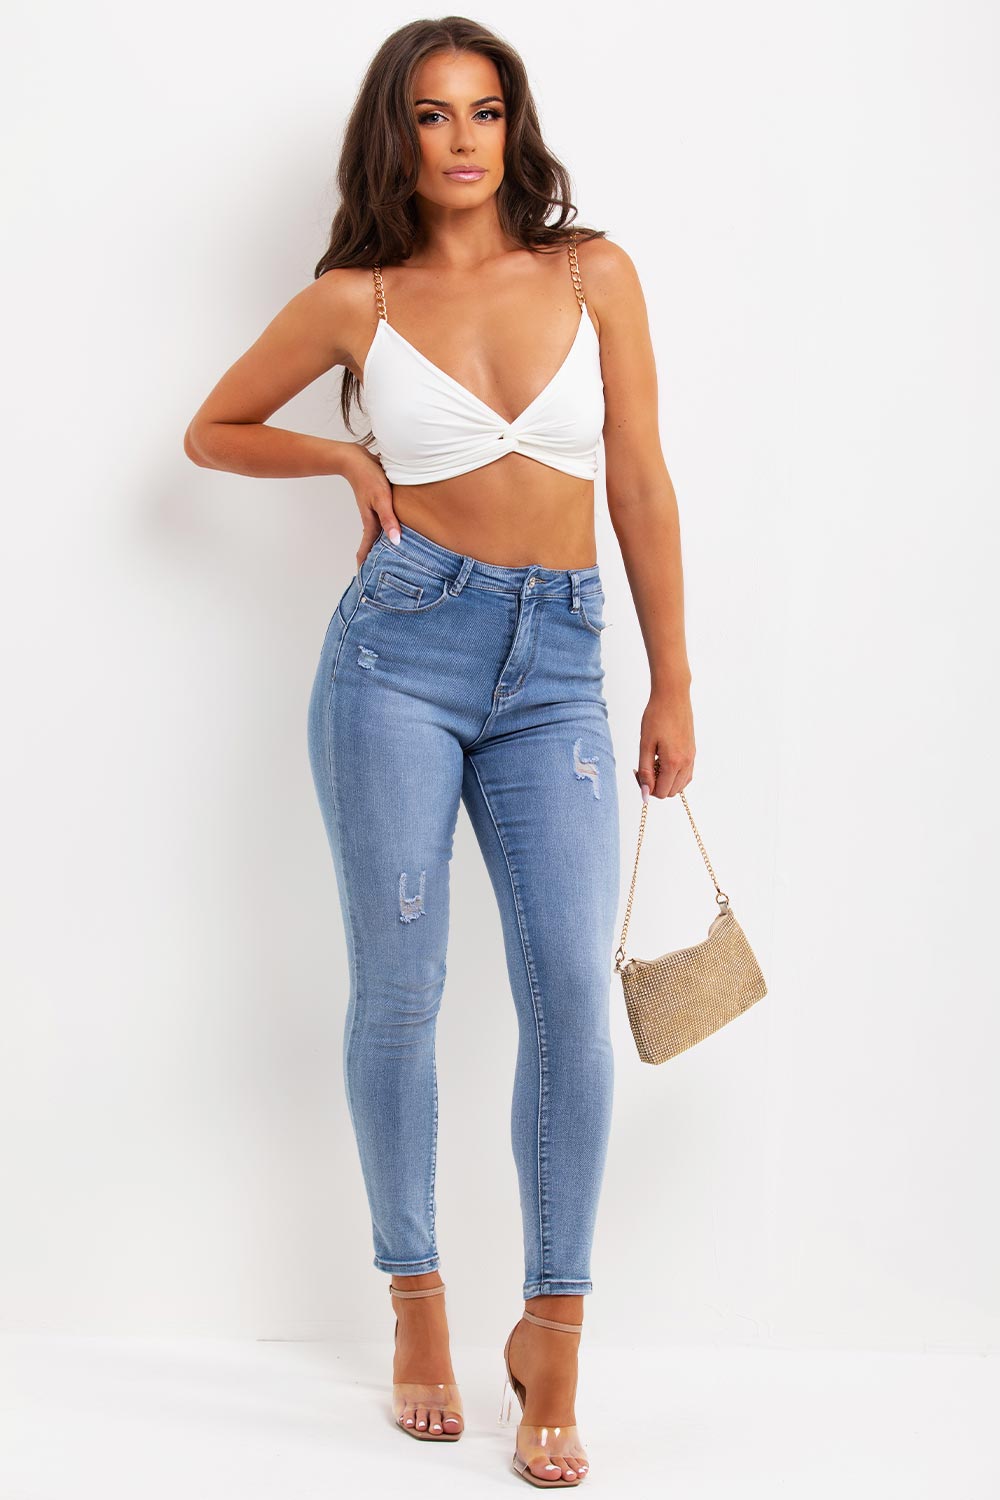 crop top with twist front and gold chains festival outfit